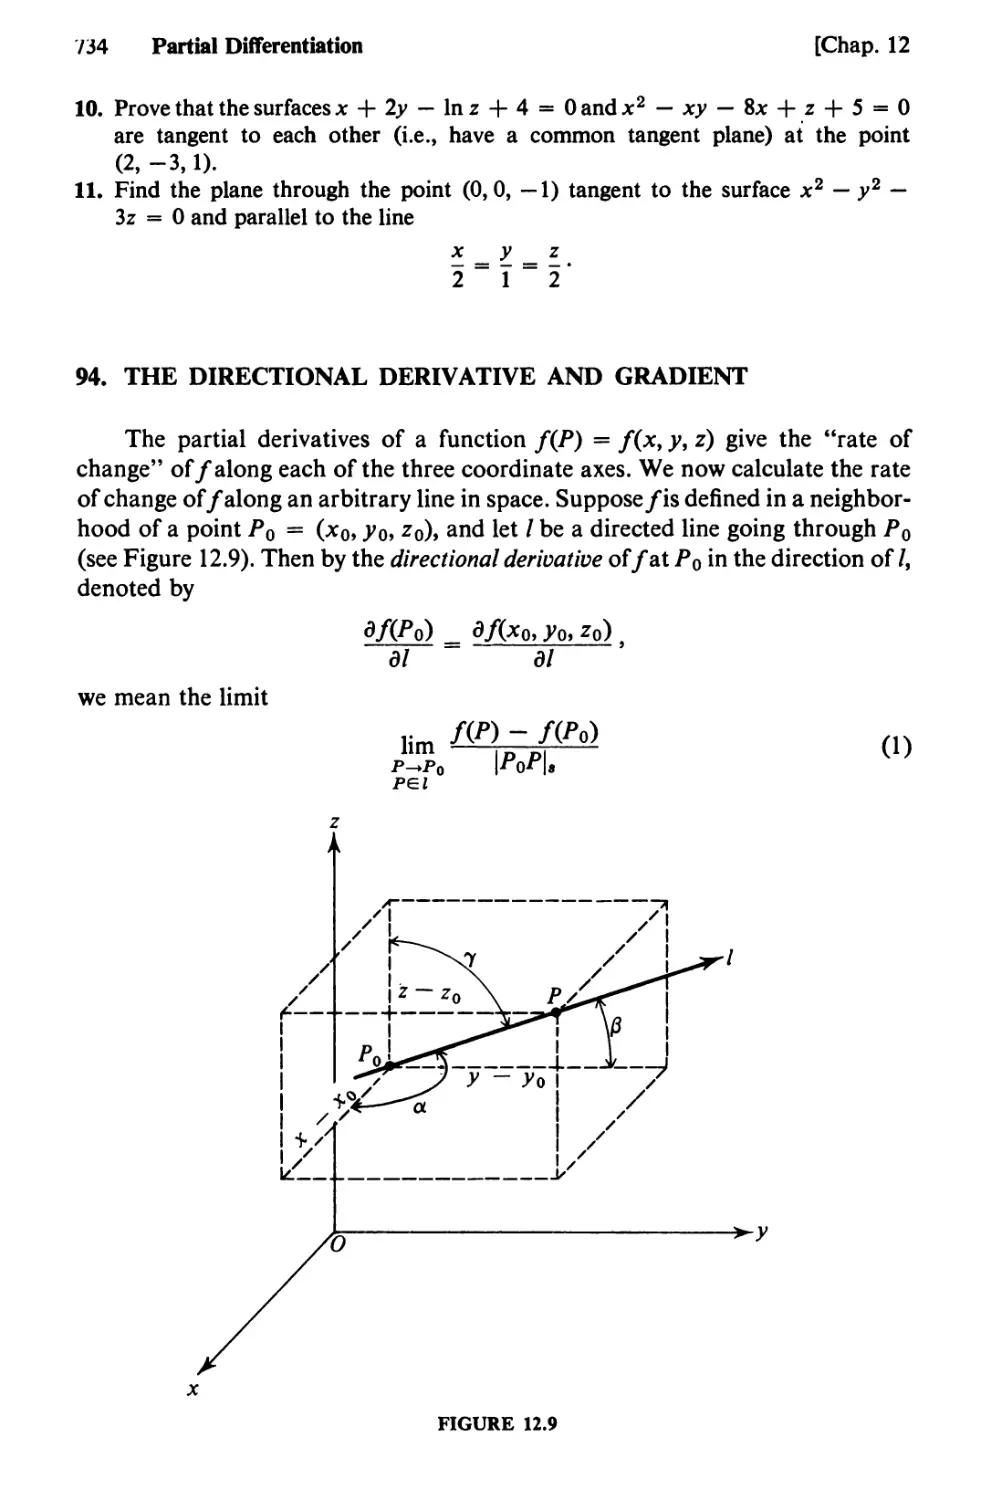 94. The Directional Derivative and Gradient